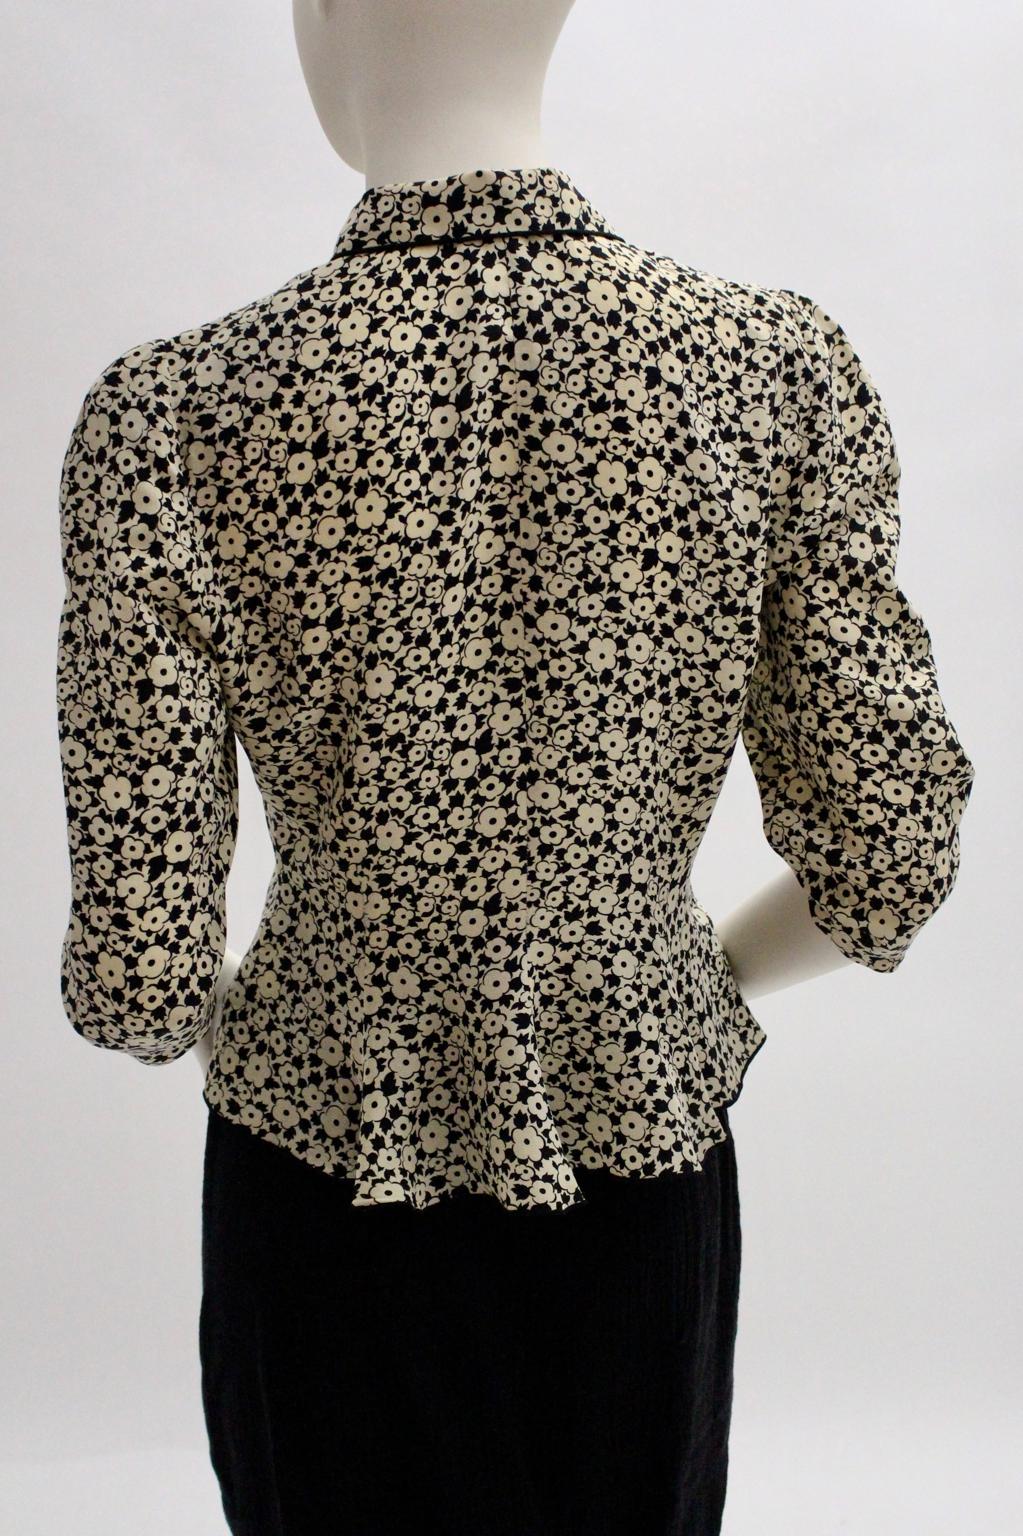 Lolita Lempicka Vintage Silk Blouse with Flower Allover Print  1980s For Sale 9